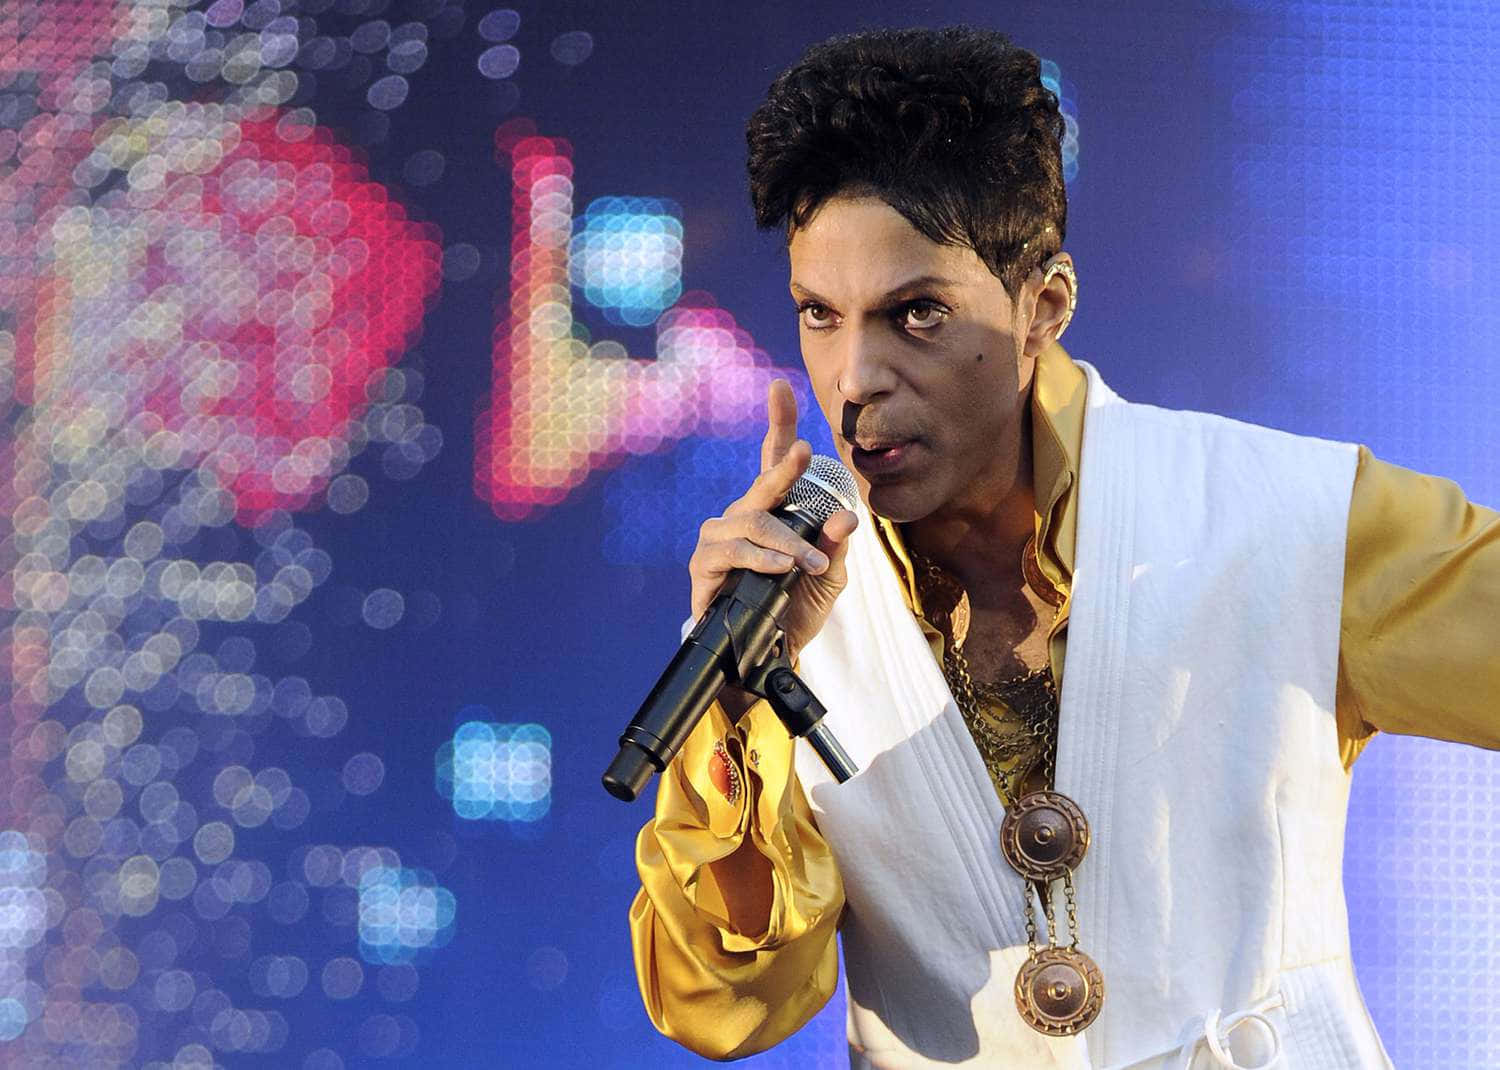 Celebrate the Legacy of the Music Icon, Prince